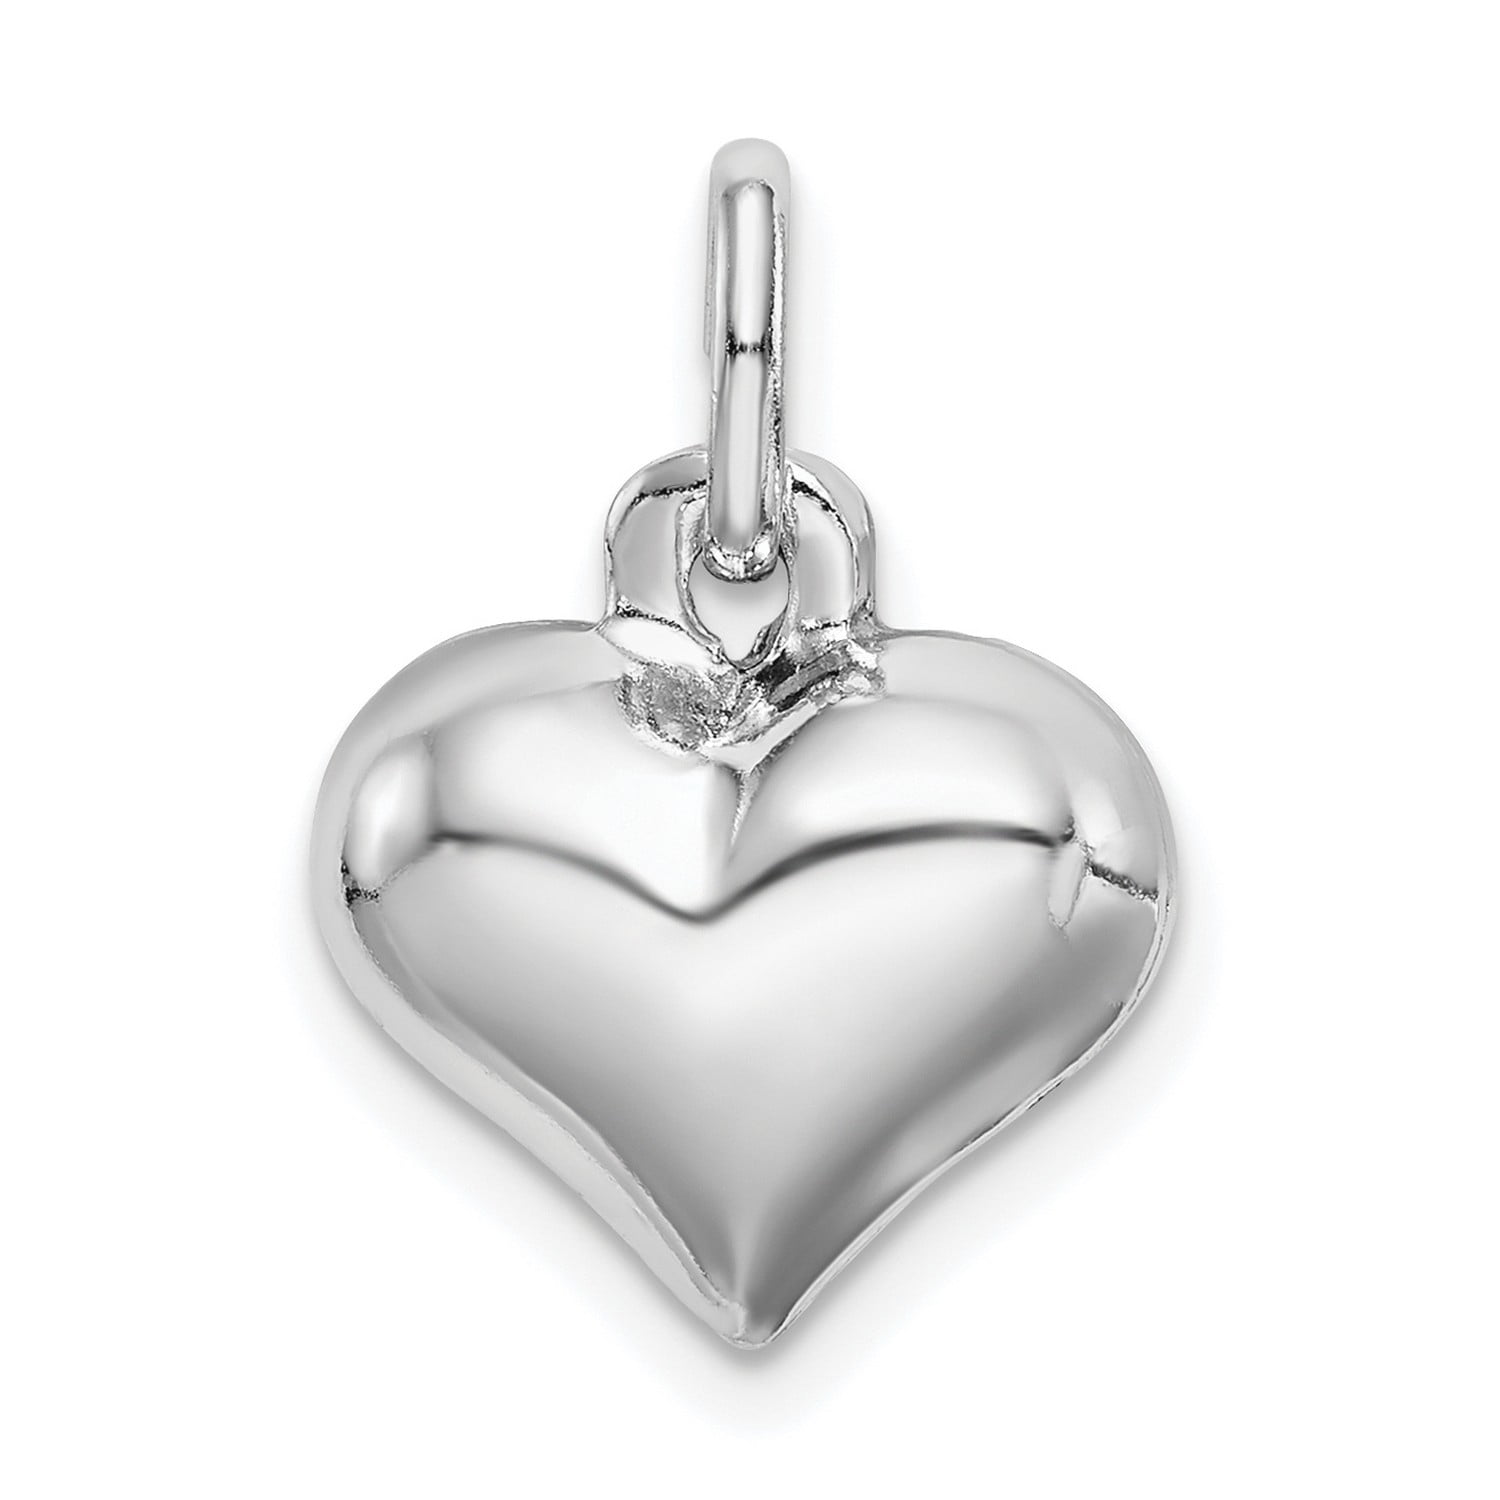 925 Sterling Silver Puffy Heart Charm Link Bracelet 6 3/4 Jewelry by Wholesale Charms 